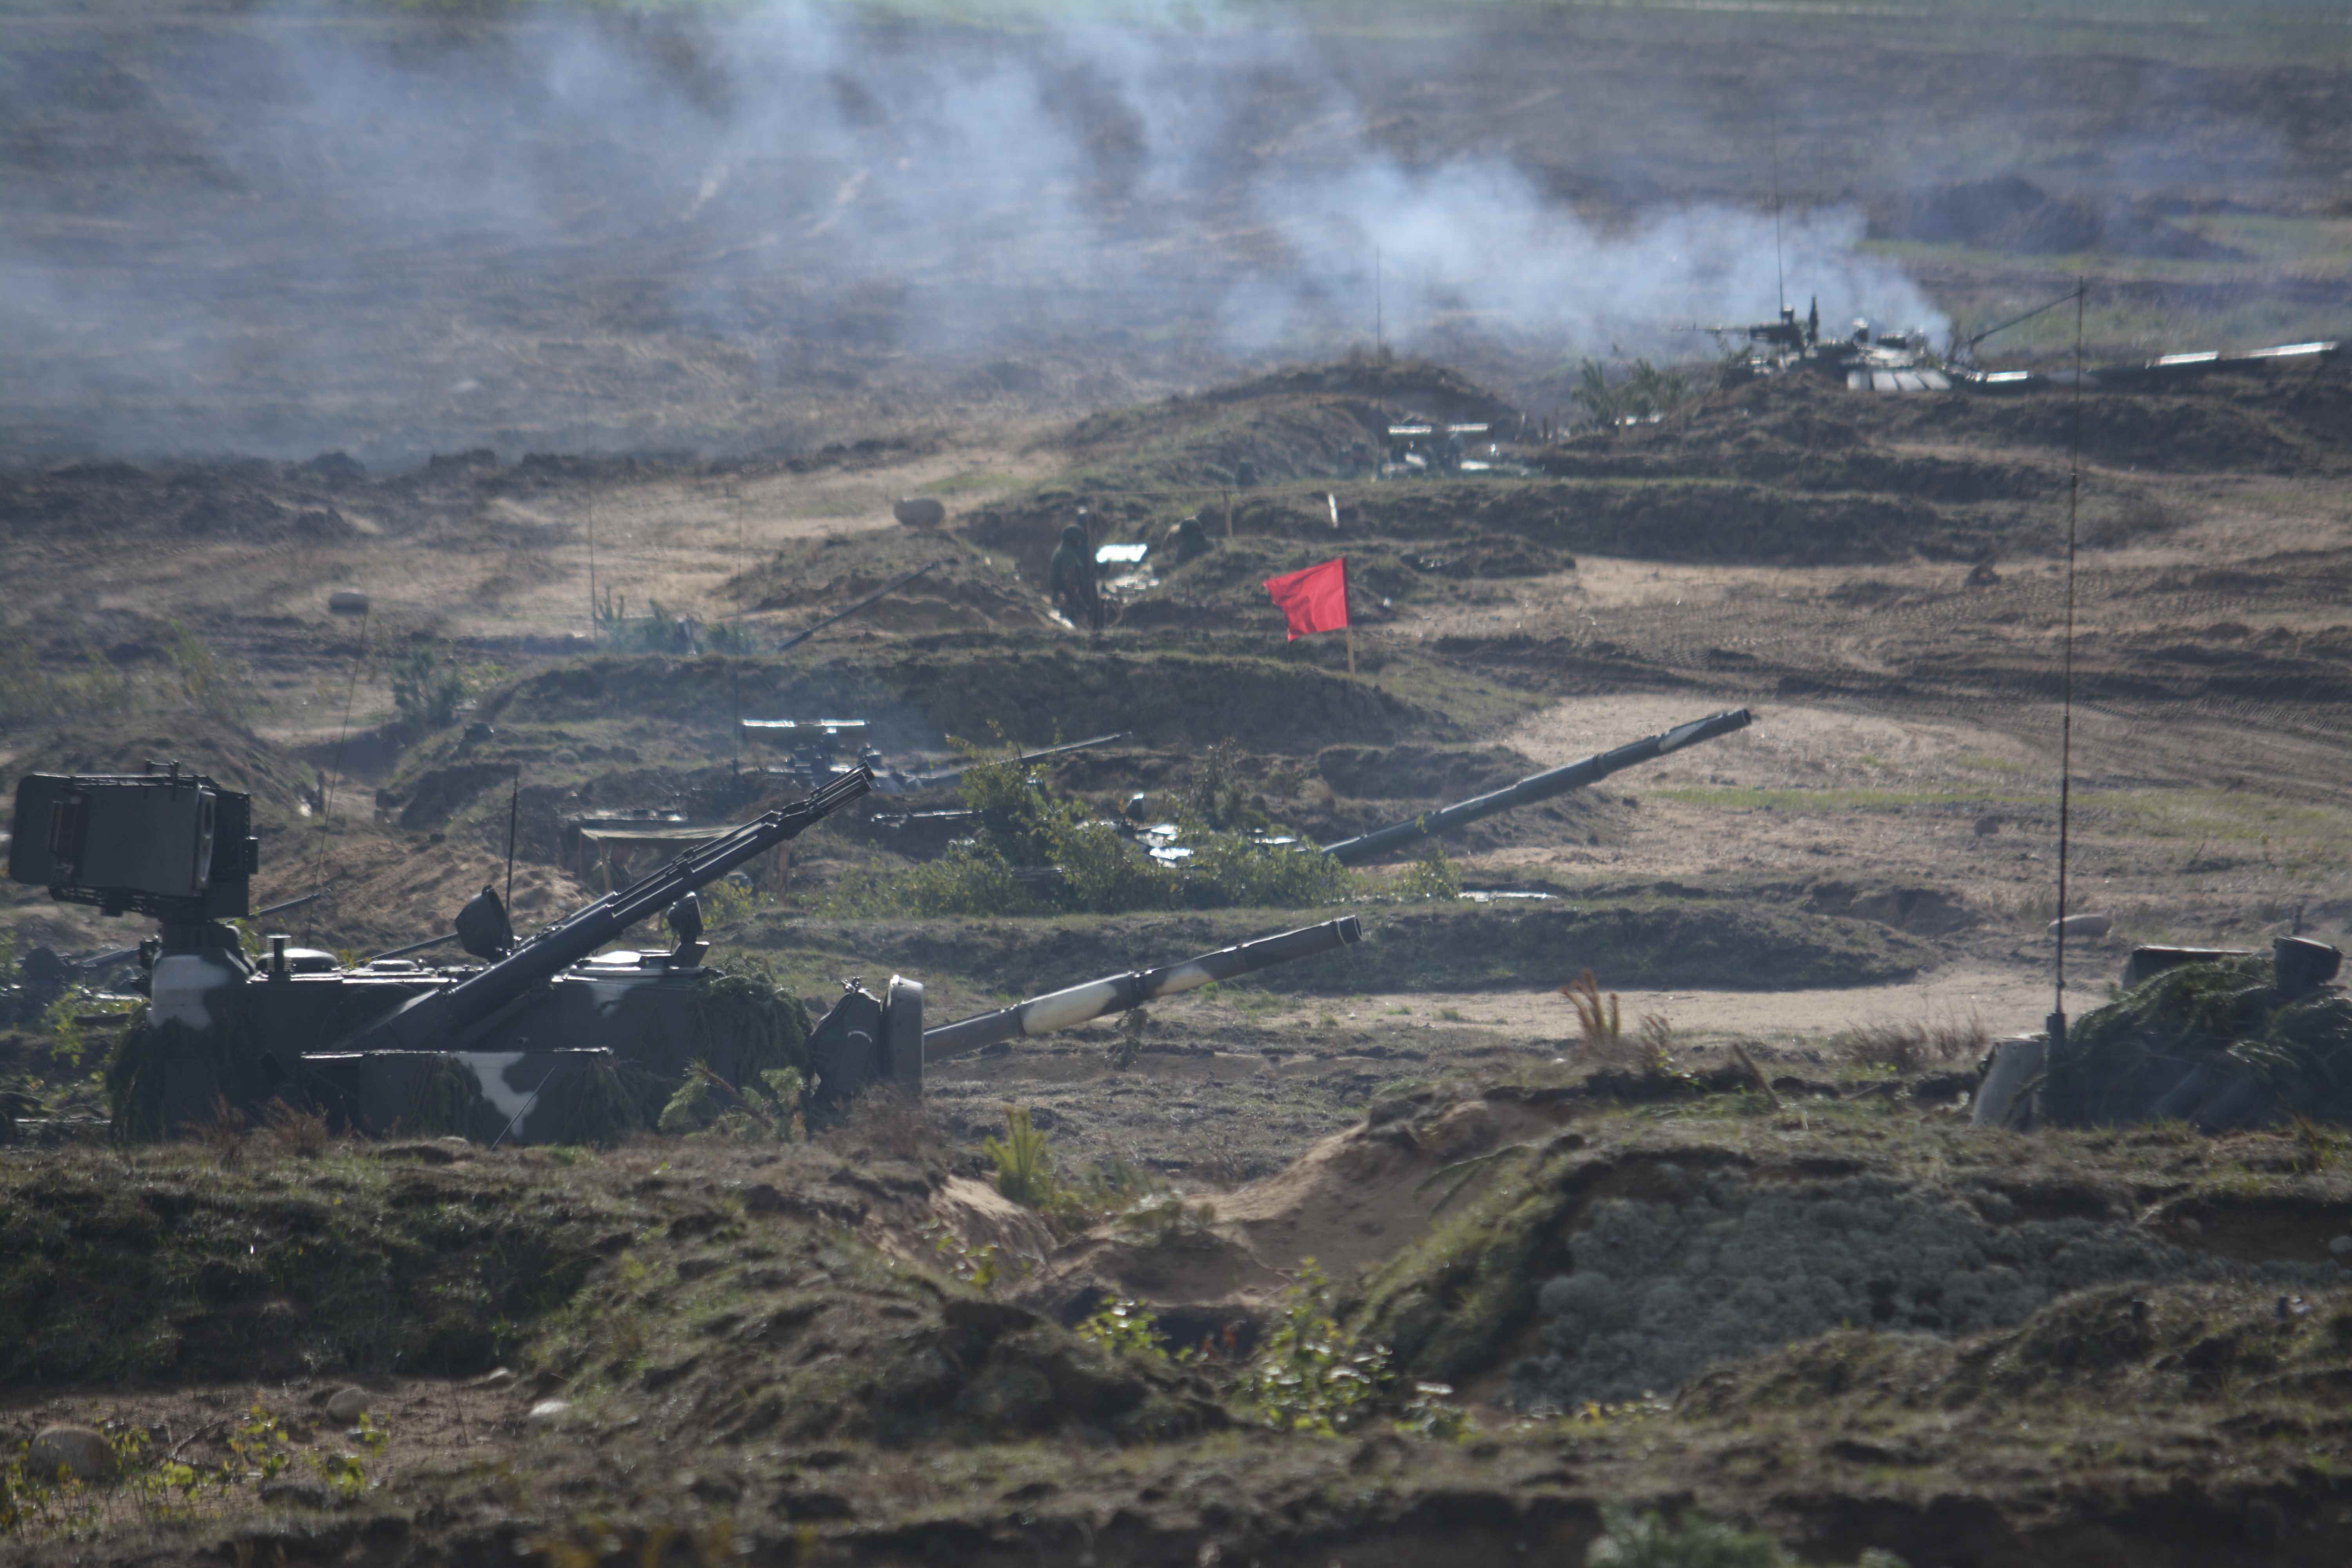 A view shows turrets of armoured vehicles during the Zapad-2017 war games, held by Russian and Belarussian servicemen, at an undisclosed location in Belarus, September 16, 2017. Vayar military information agency/Belarussian Defence Ministry/Handout via REUTERS